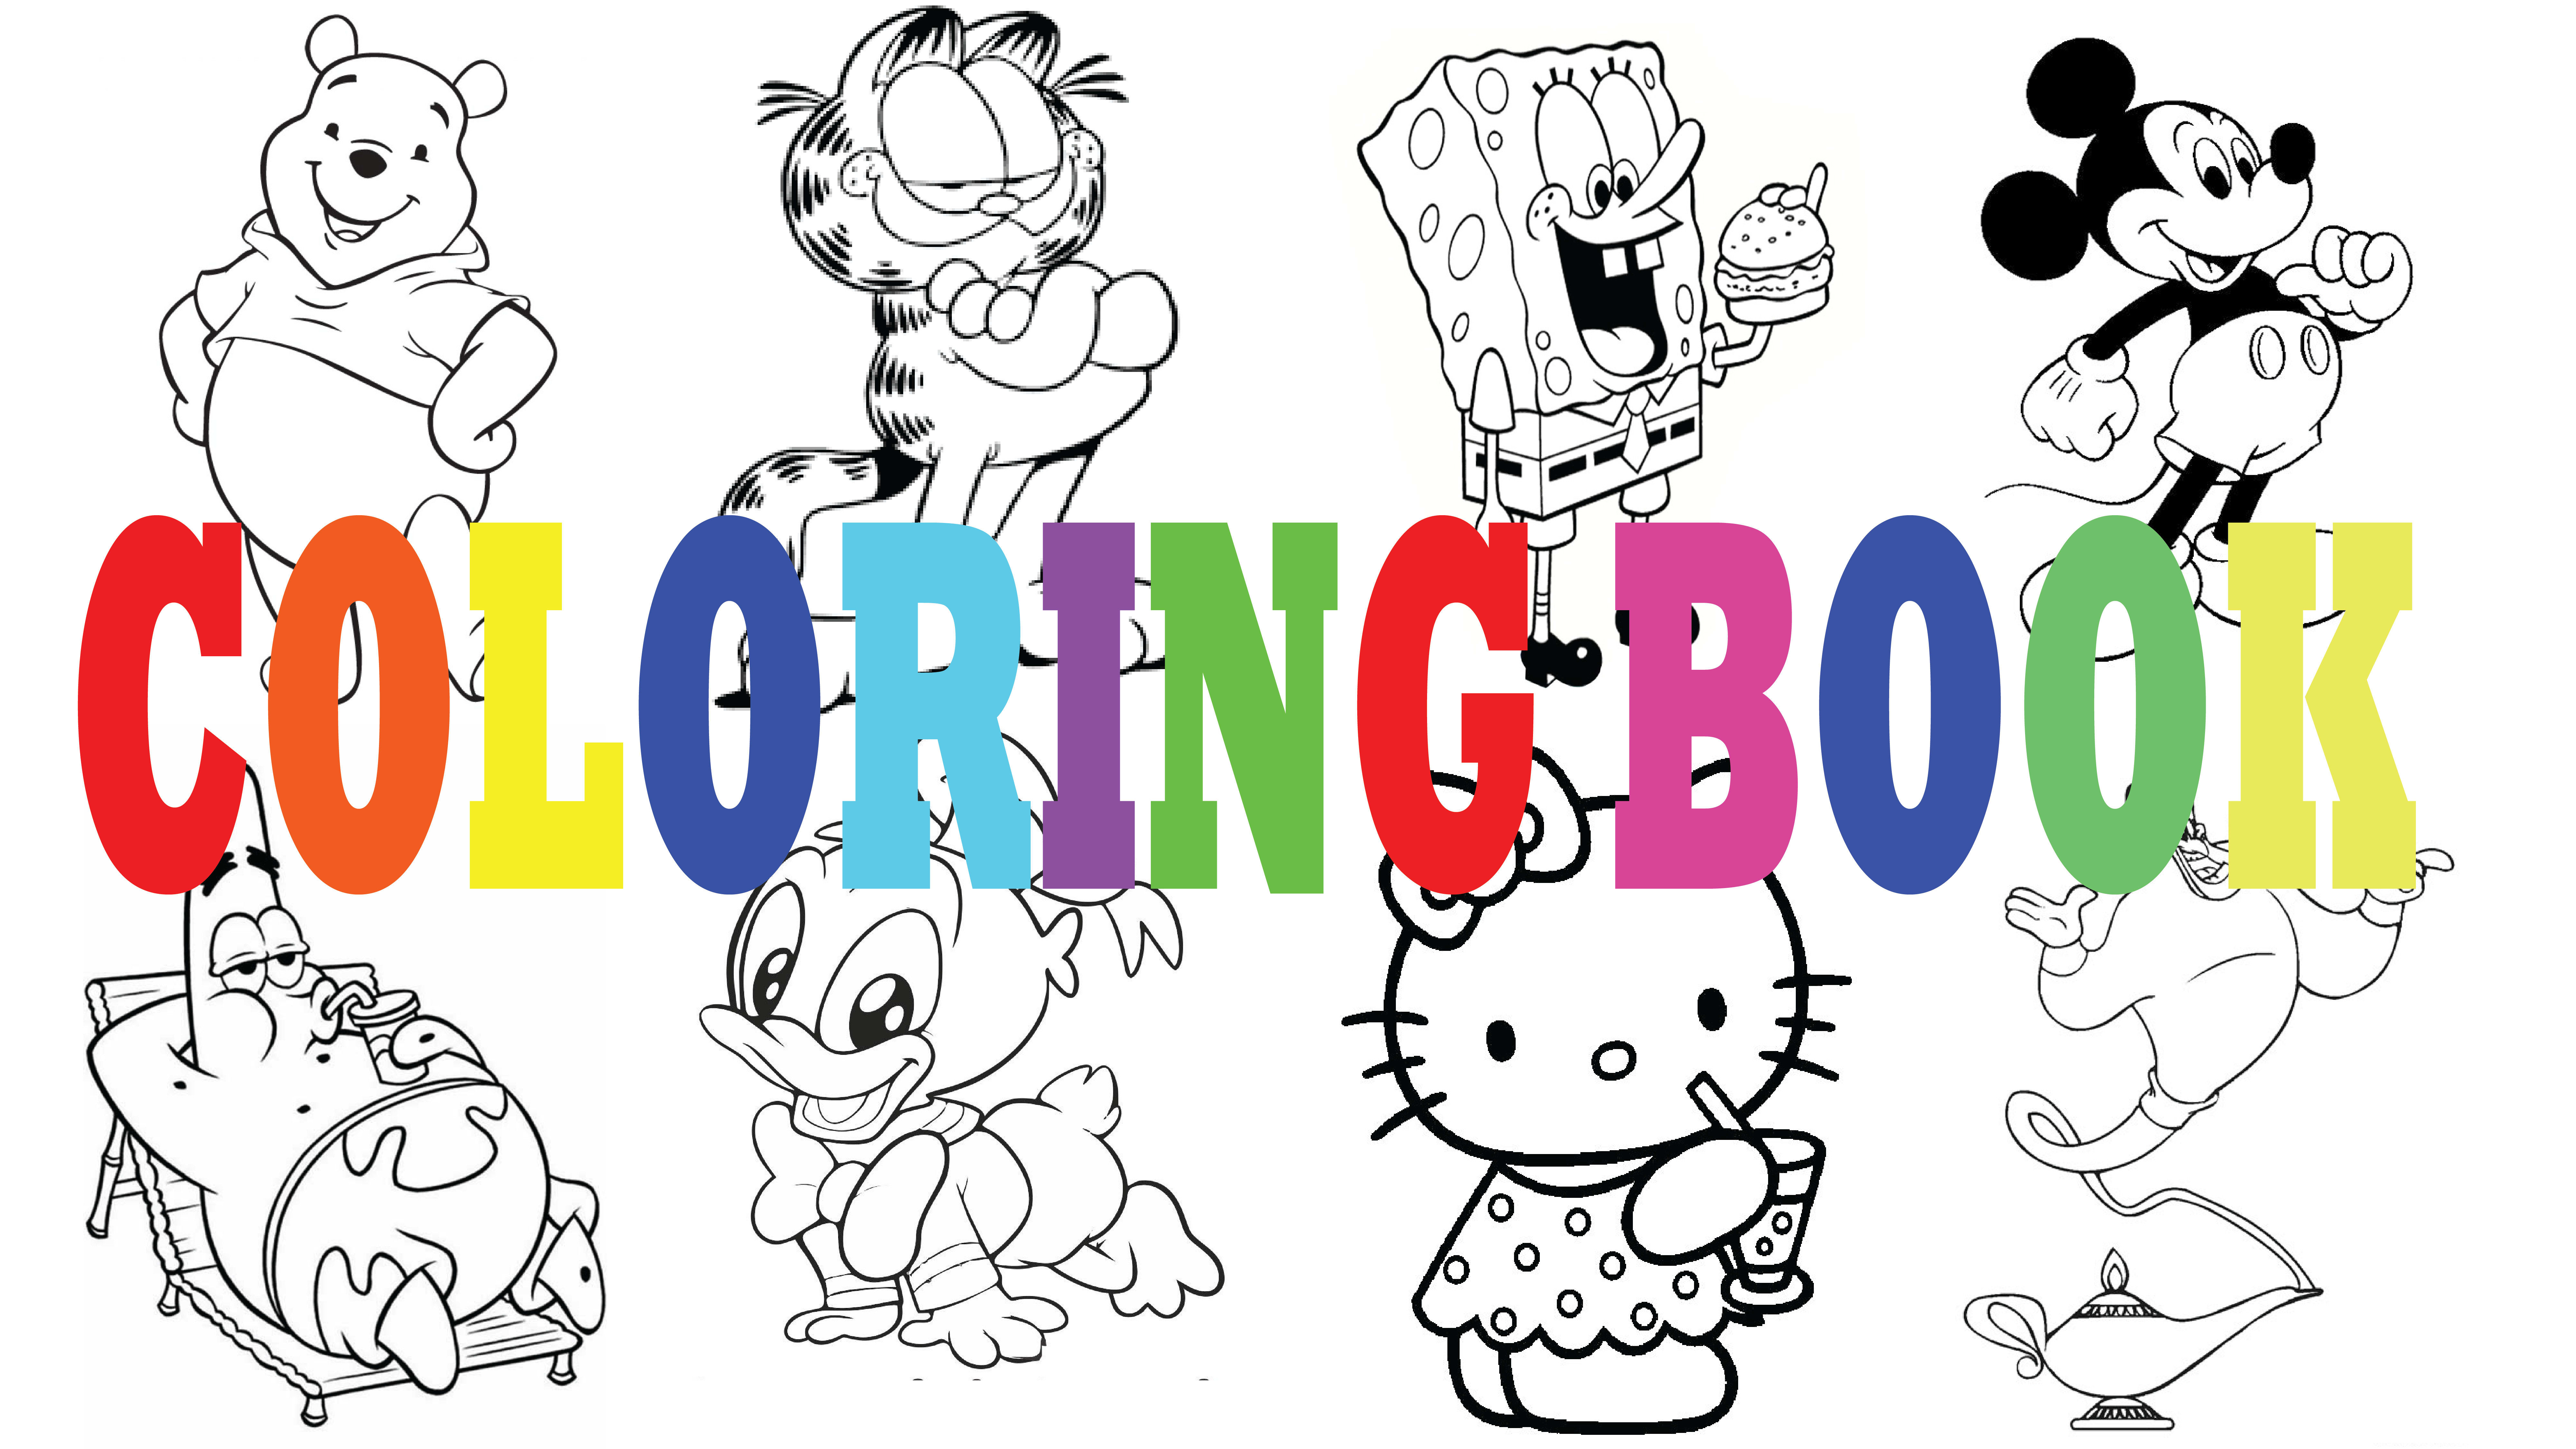 Do cartoon characters for children coloring books by Lestermakes | Fiverr